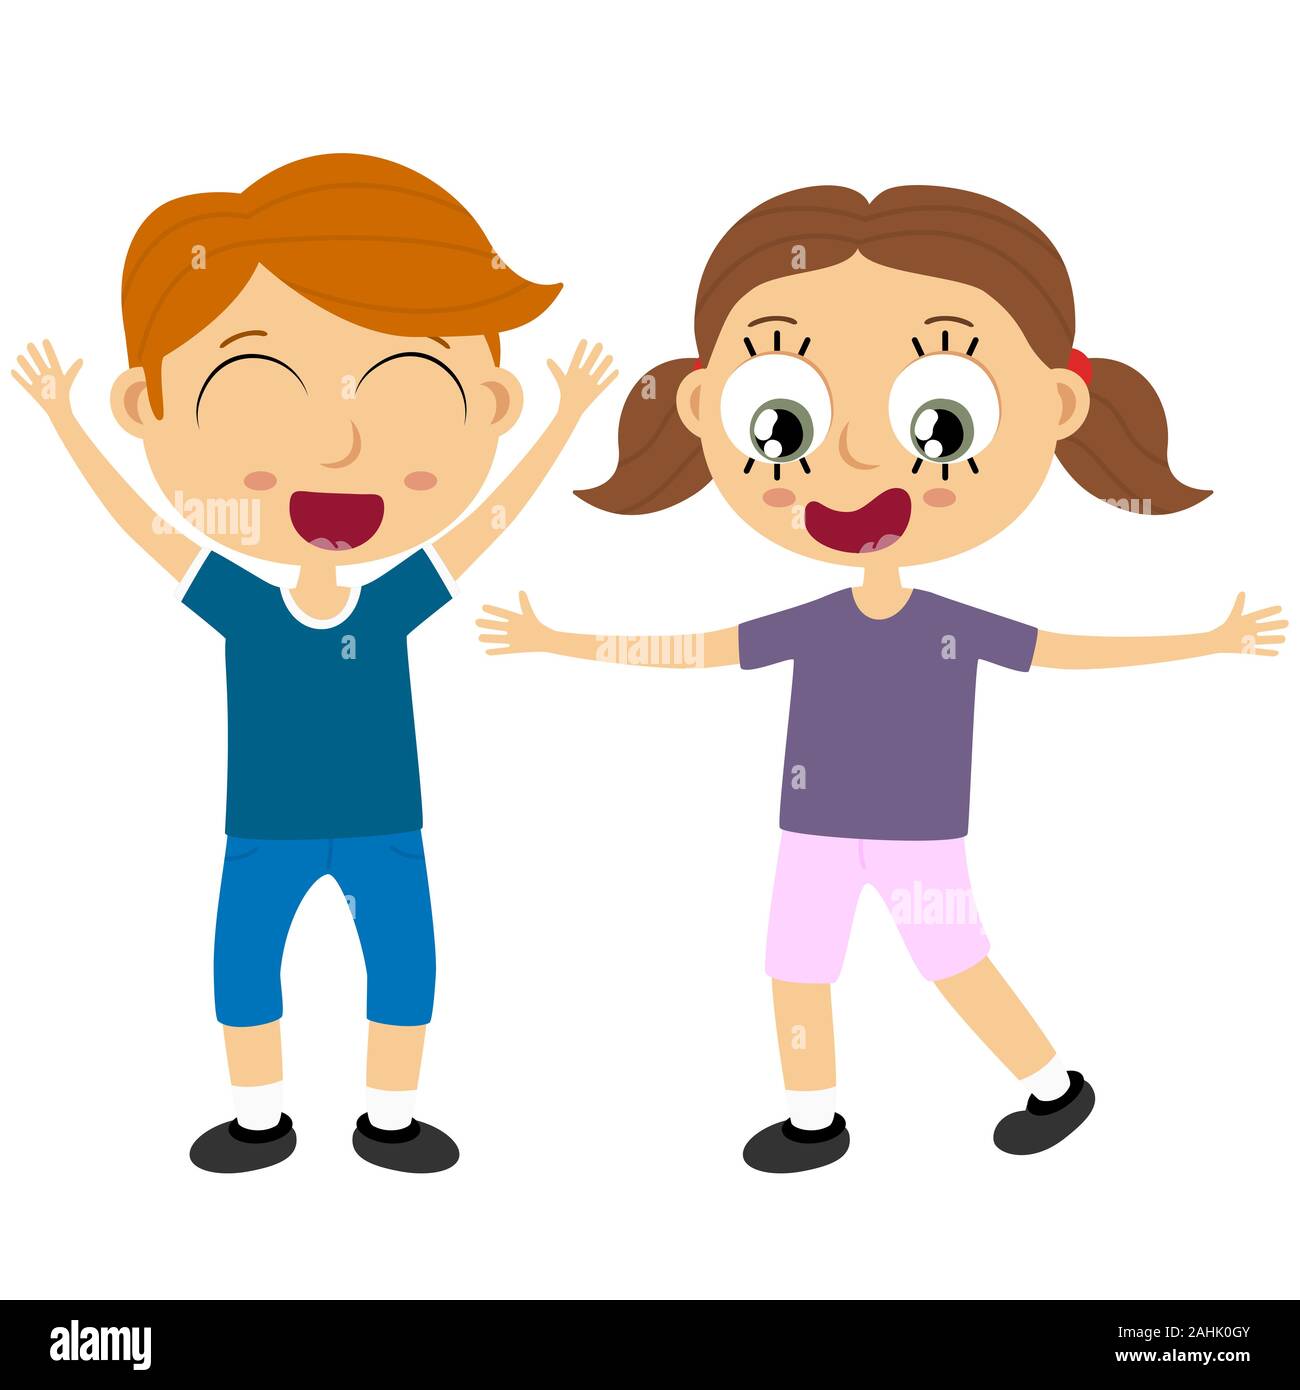 EPS10 vector file showing happy young kids with different skin colors, boys and girls laughing, hopping,  playing and having fun together Stock Vector